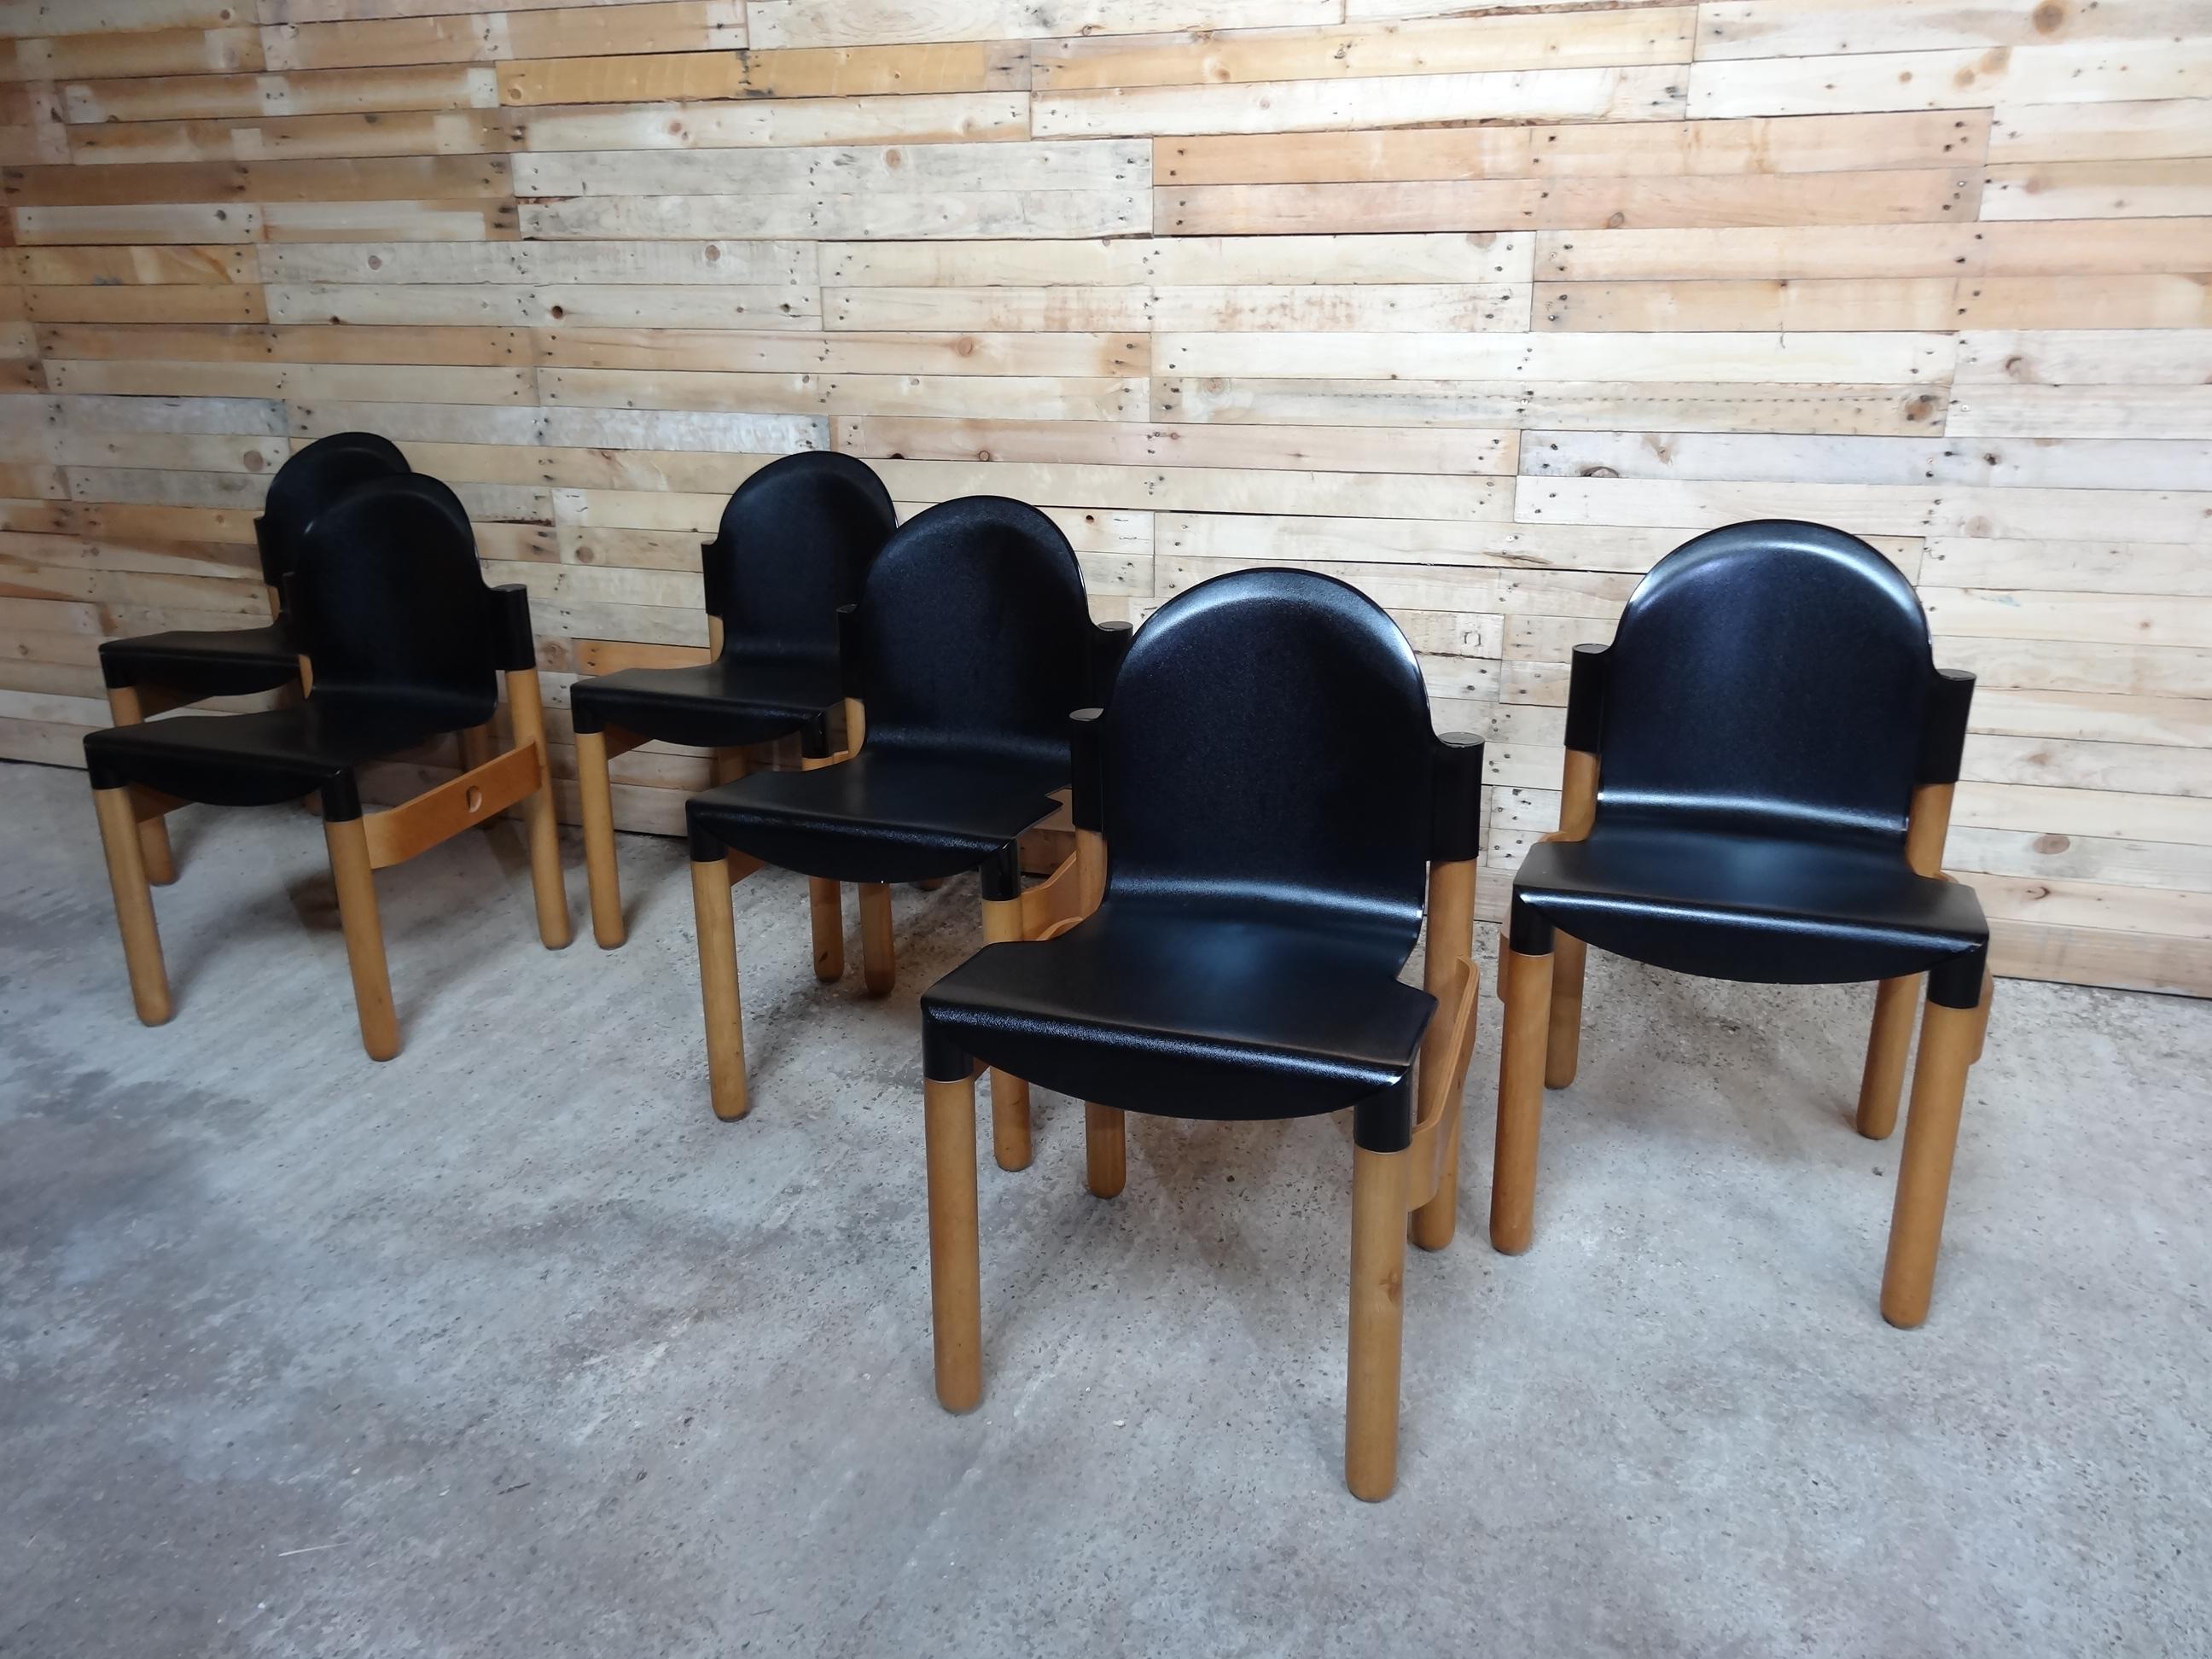 Stunning set of chairs (6) designed by Gert De Lange and made by Thornet, the chair was call ''The Flex'' chair and was awarded the 'Gute Form' price in 1969, beech frame and black synthetic seat Manufacturer’s mark. Lovely original very comfortable